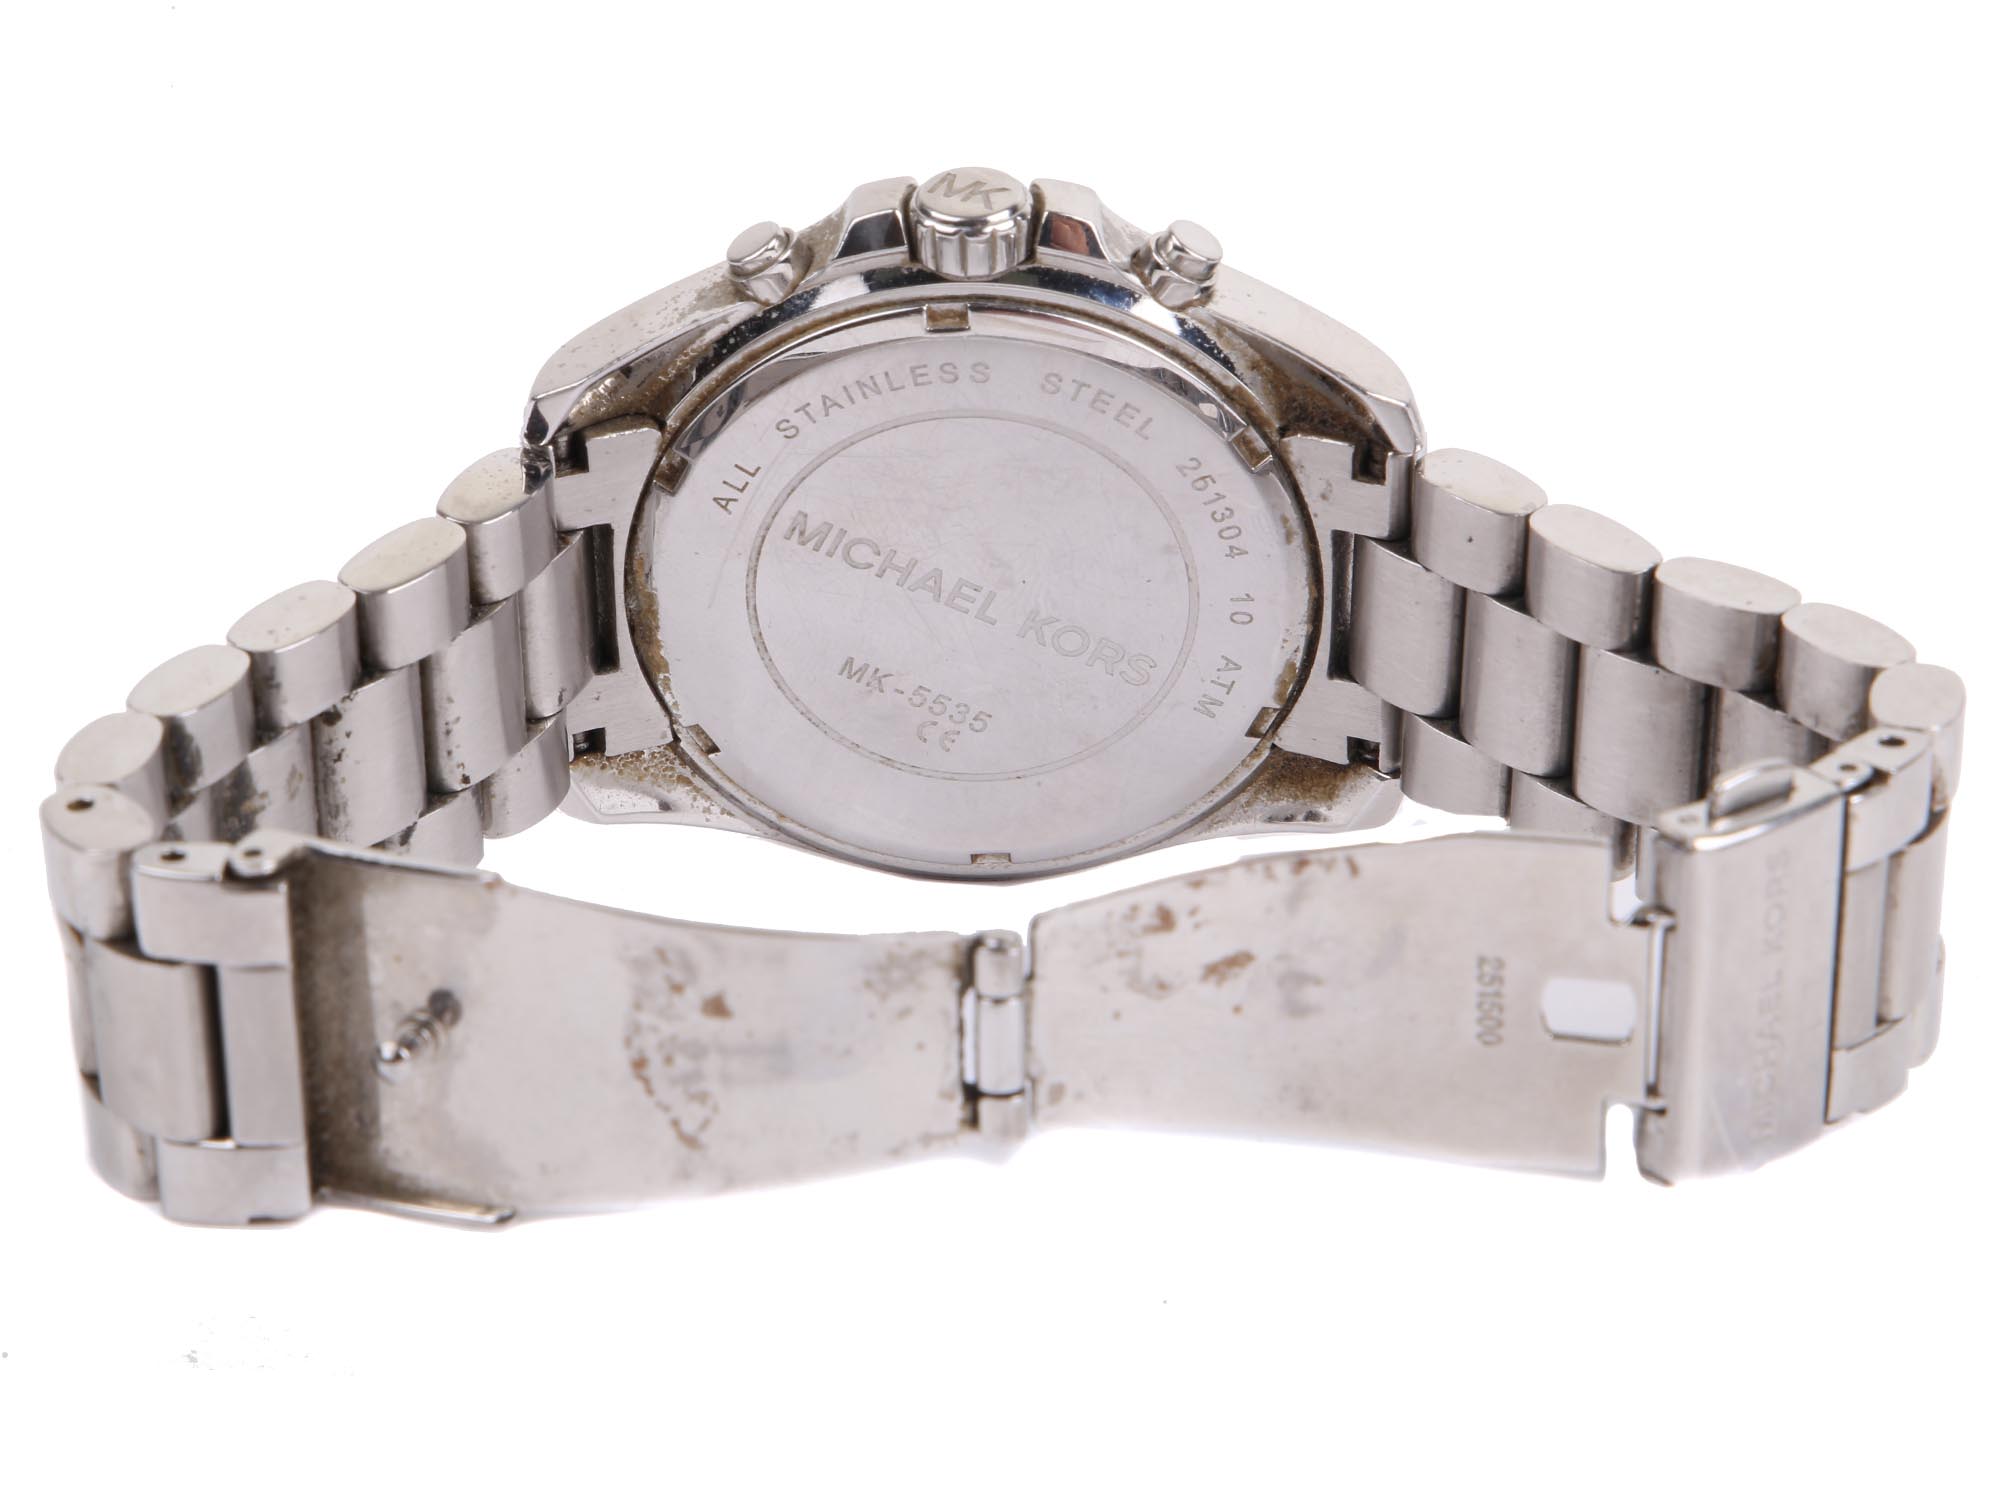 A MICHAEL KORS MALE STAINLESS STEEL WRIST WATCH PIC-1